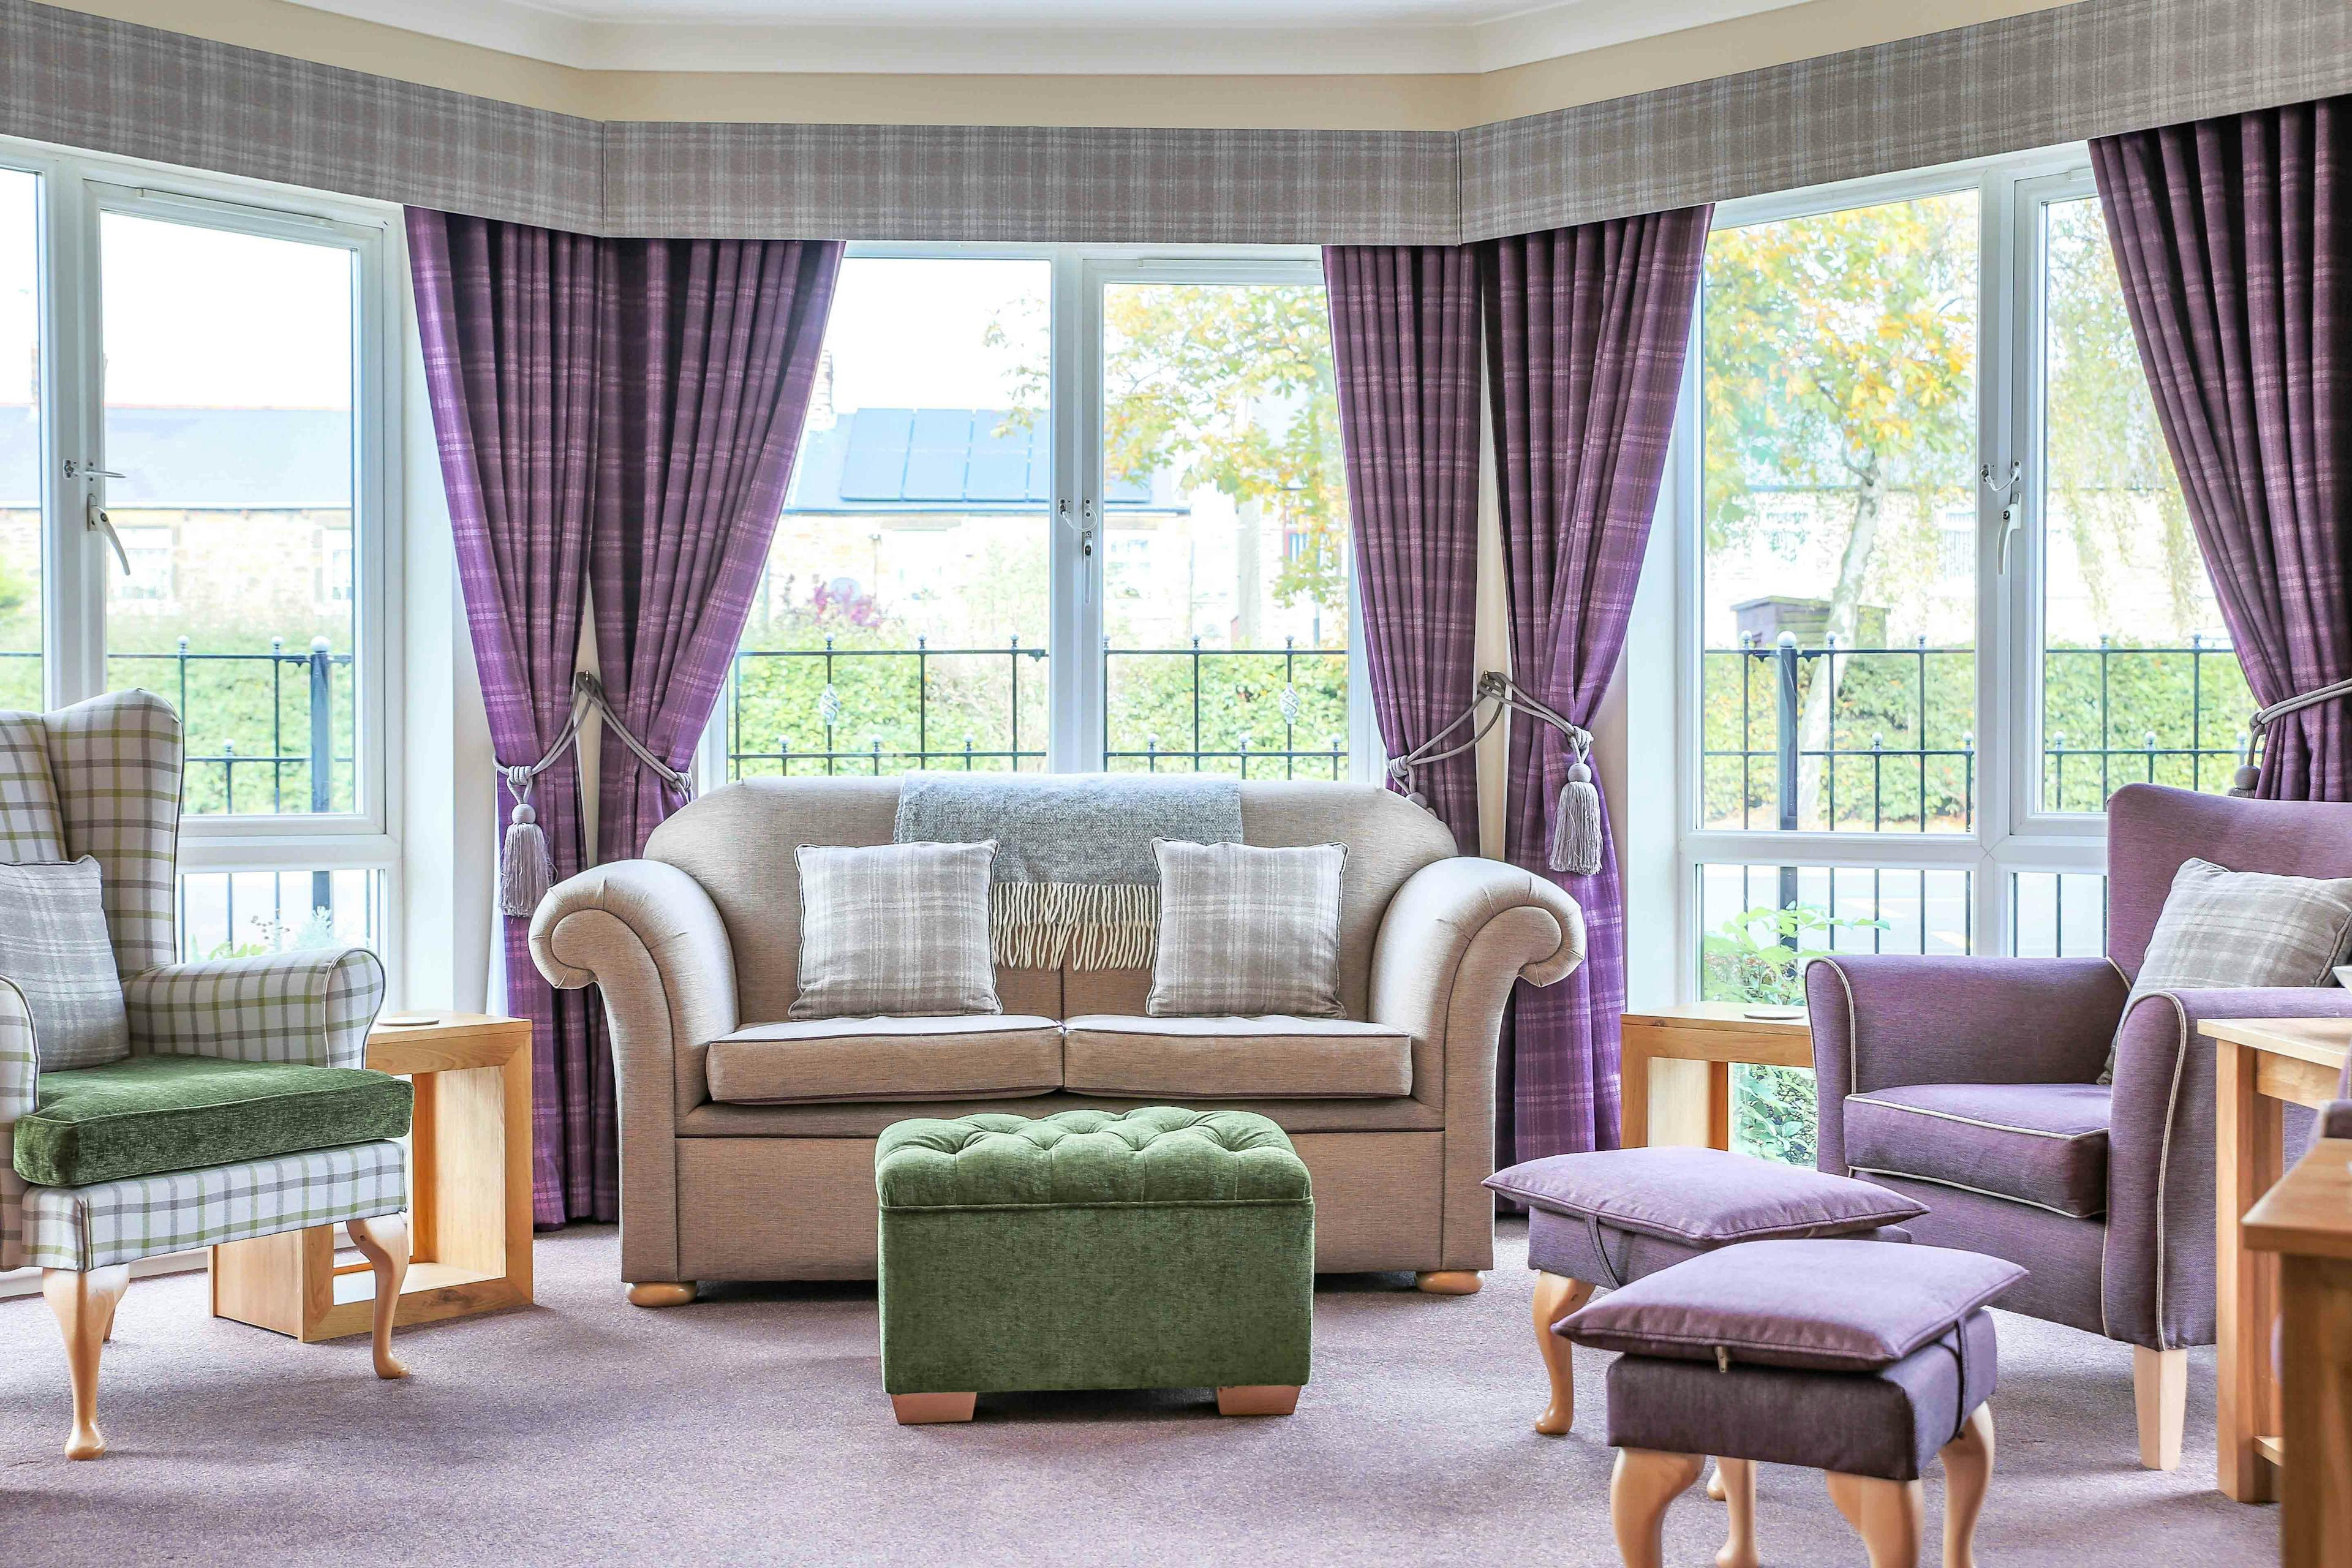 Communal Area at Station Court Care Home in Ashington, Northumberland